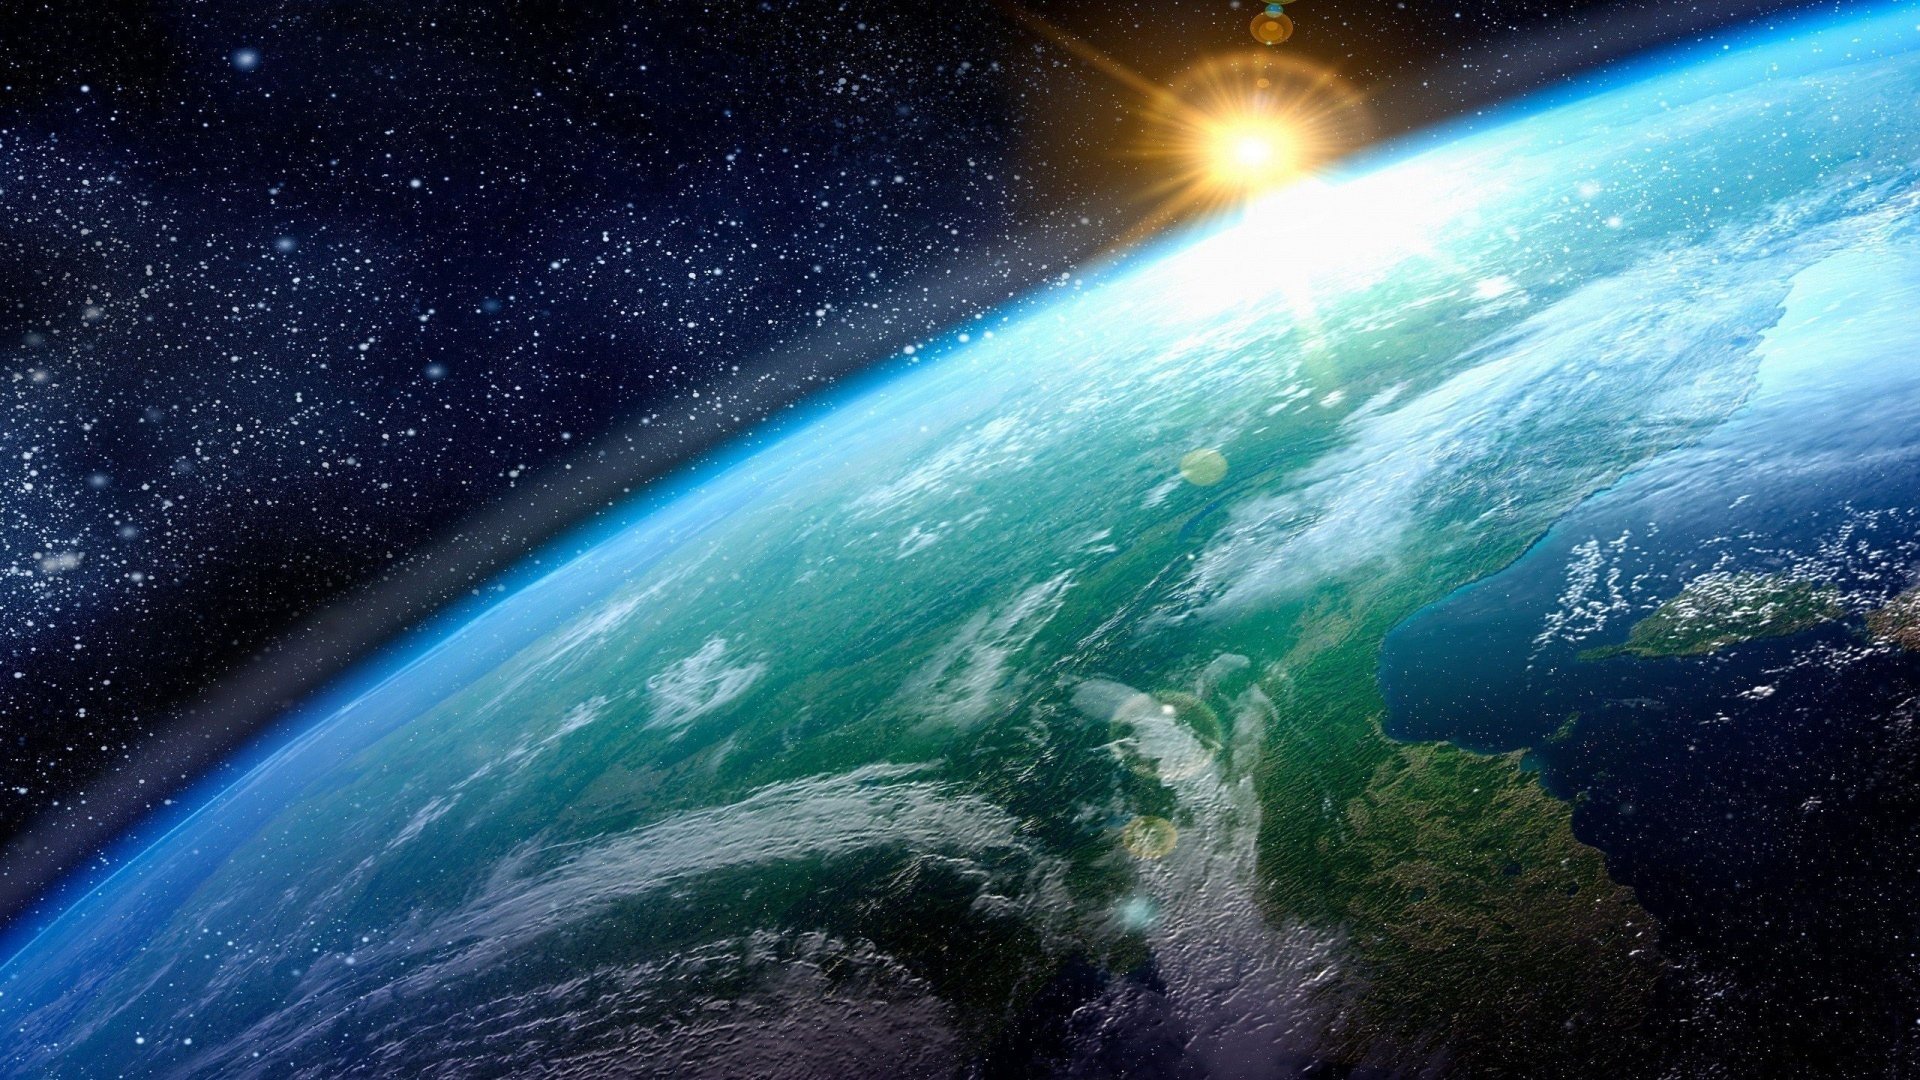 Download wallpaper 1920x1080 earth, sun, planet, surface, stars HD background